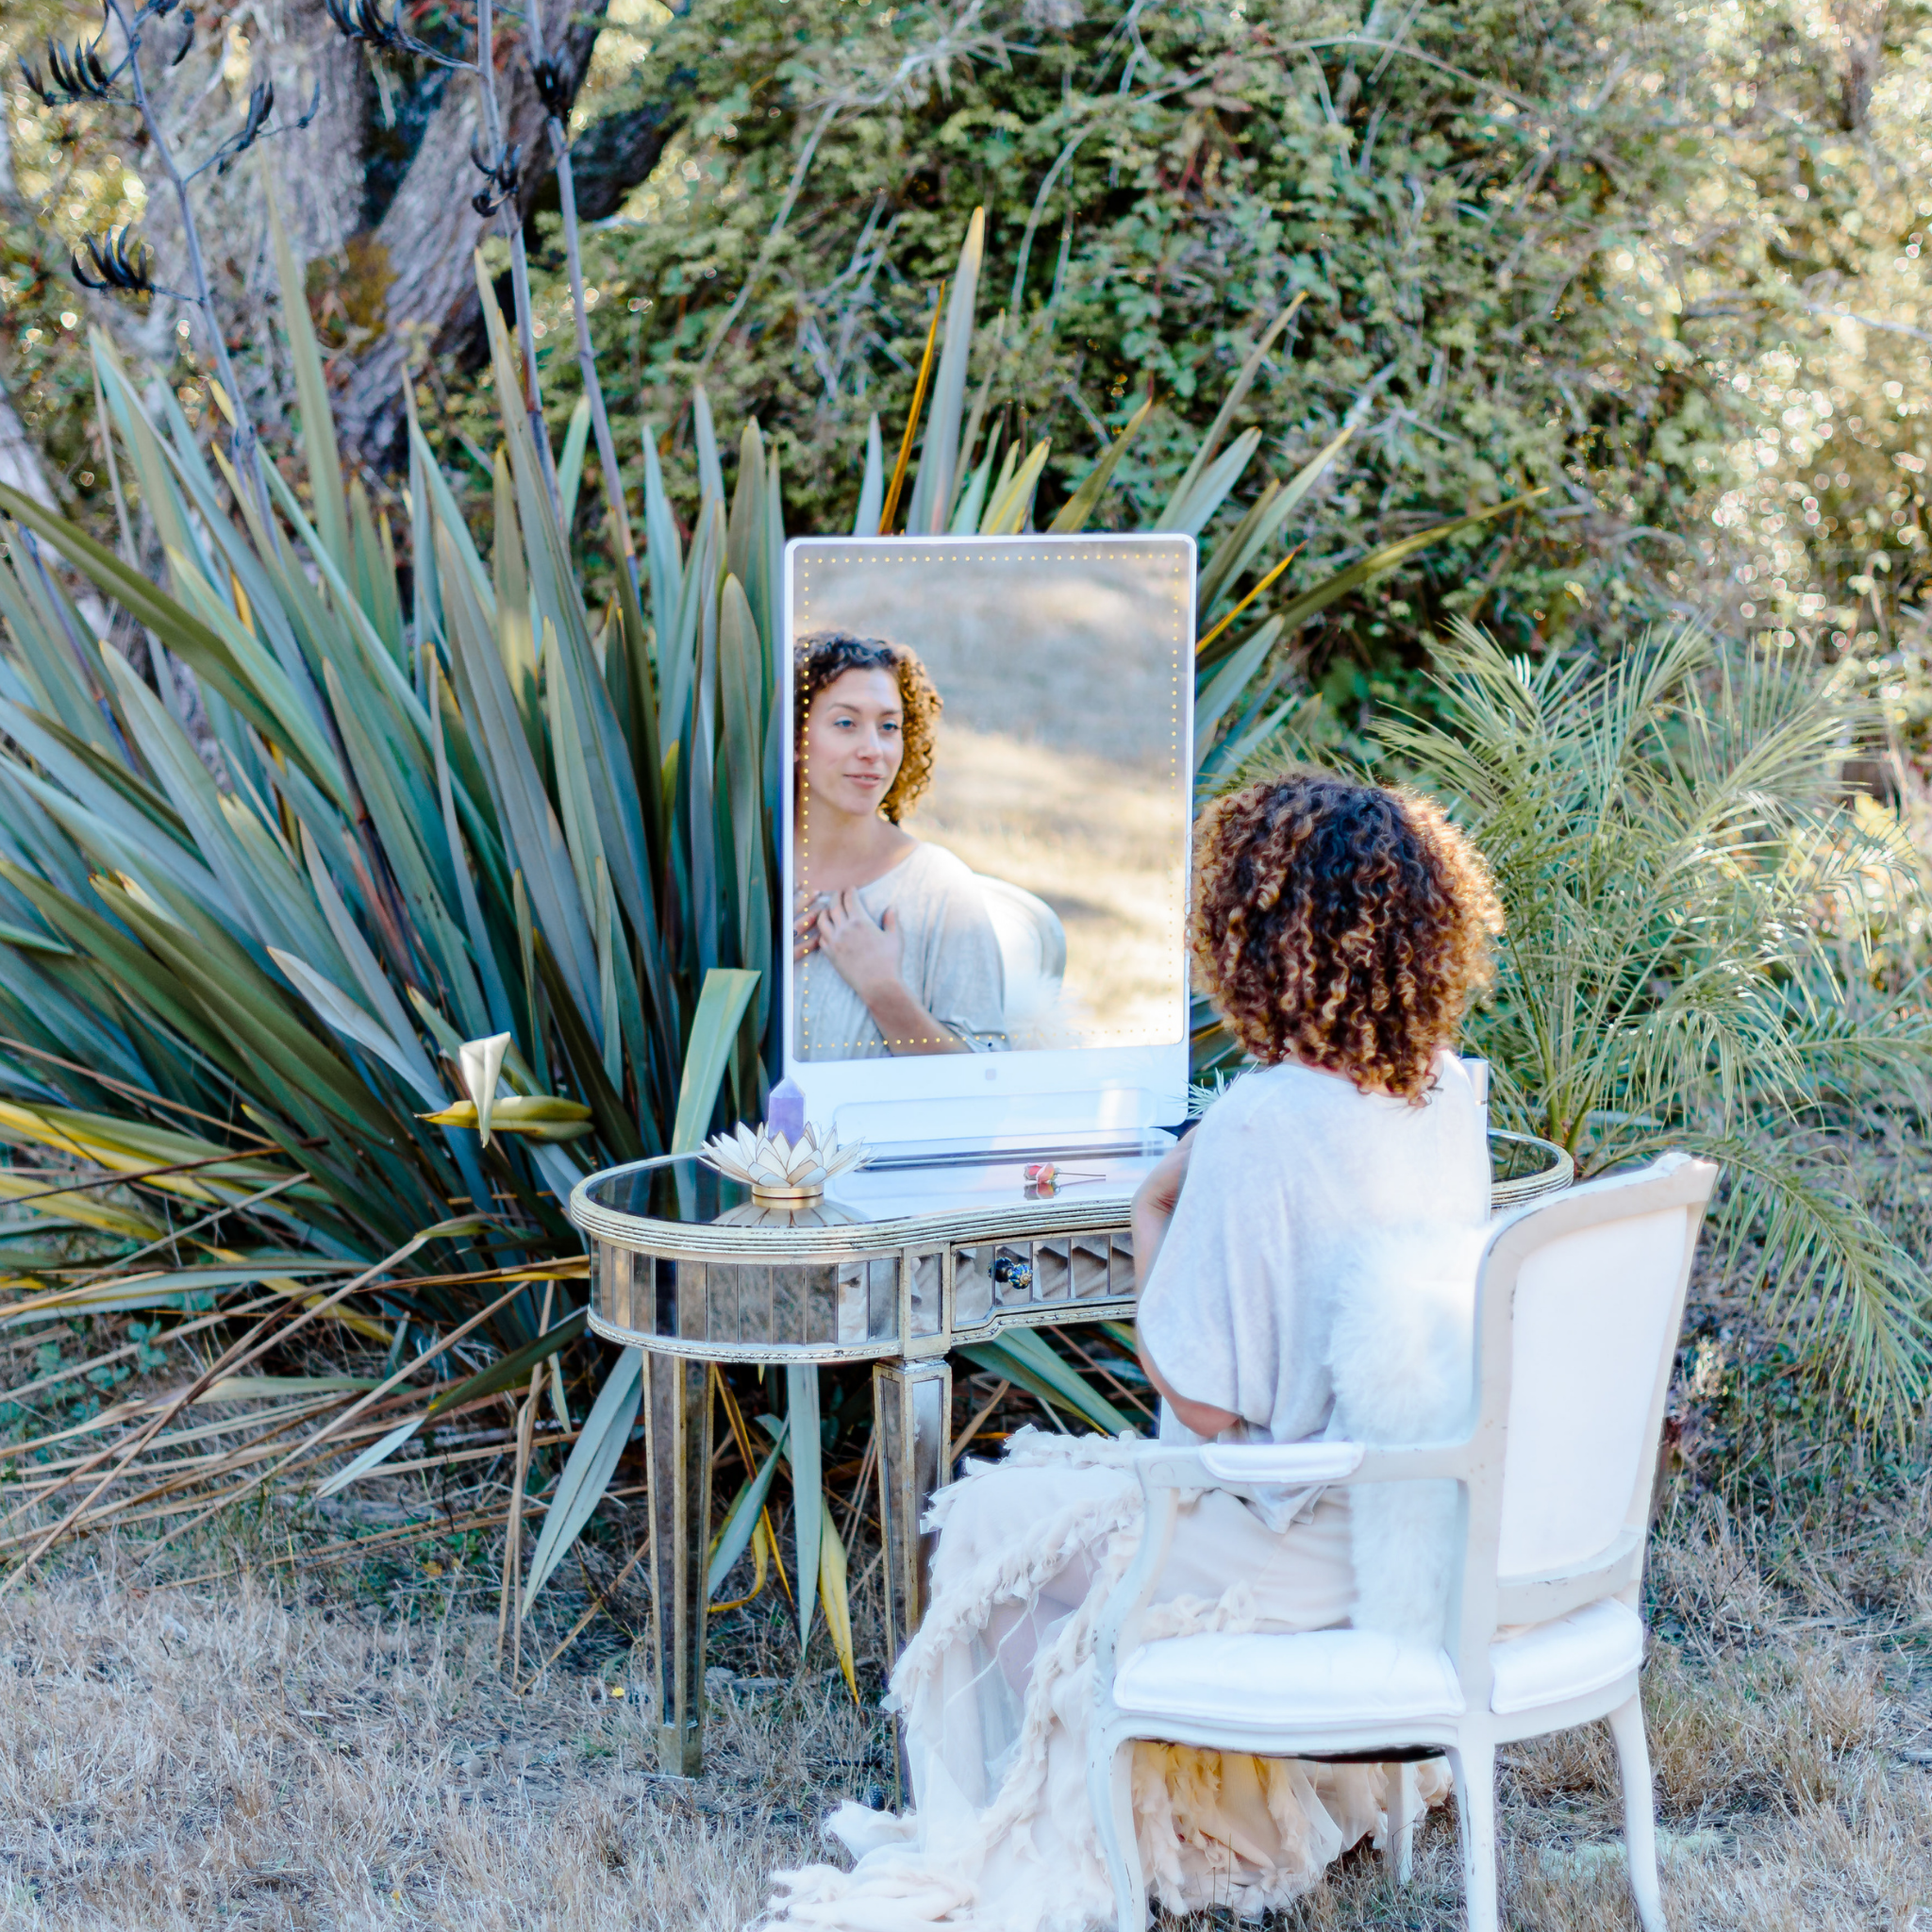 The Mind-Skin Connection: Enhancing Beauty and Wellbeing Through Mirror Work